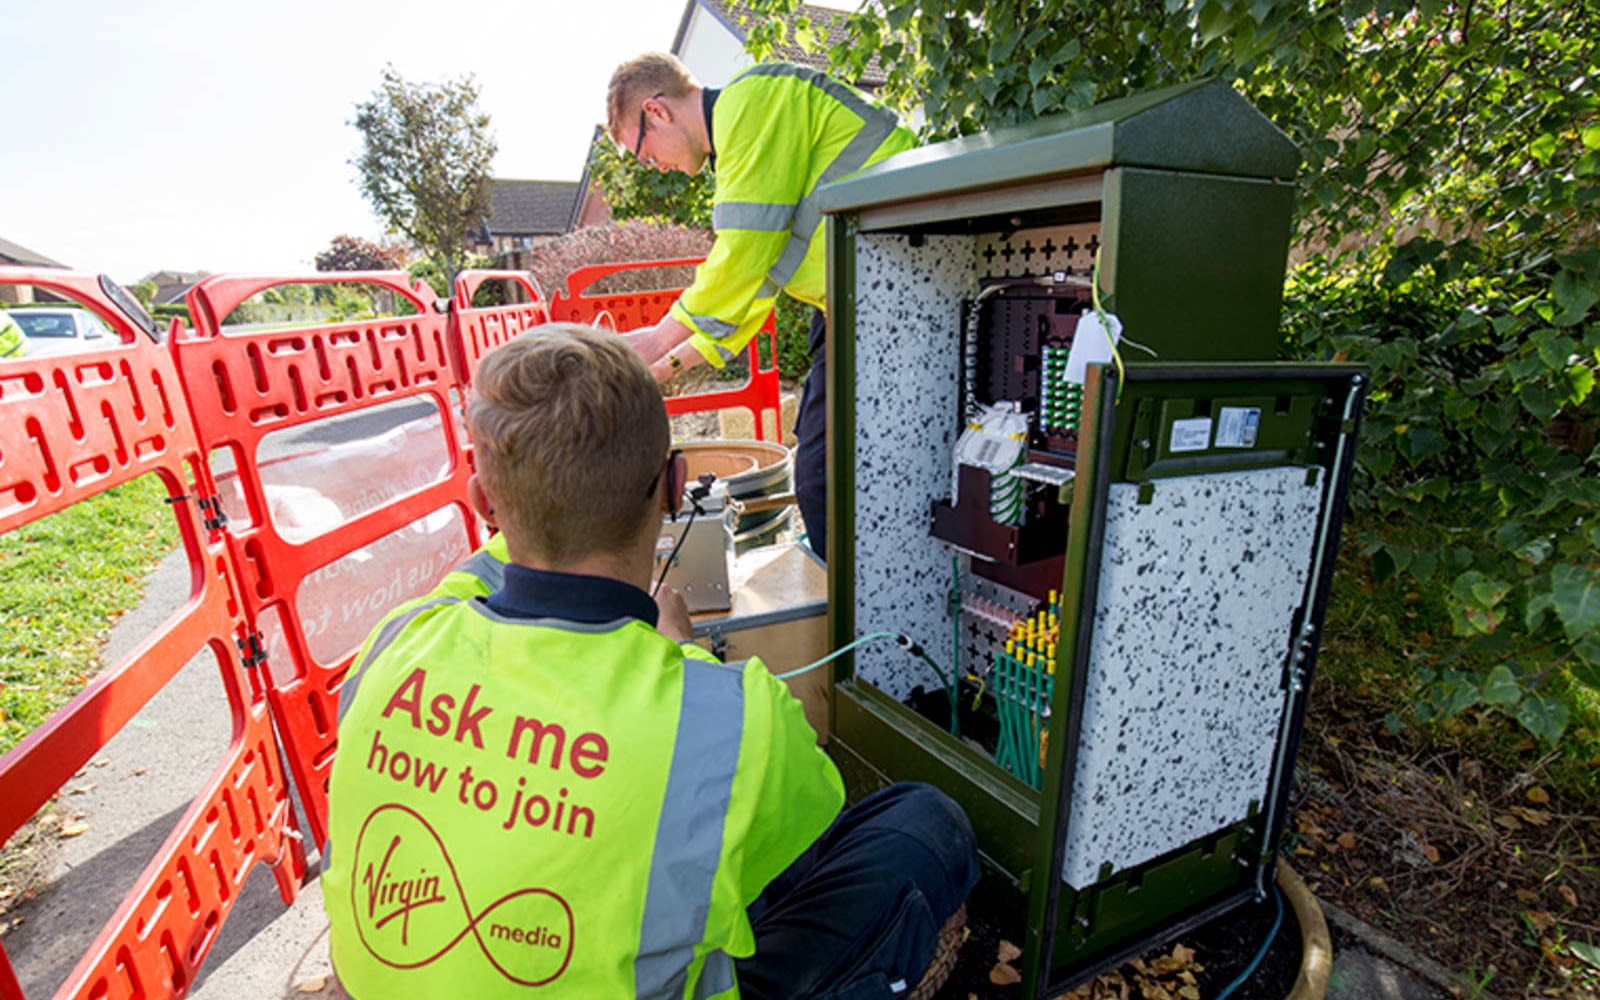 A Virgin Media engineer connects a broadband connection at an exchange point